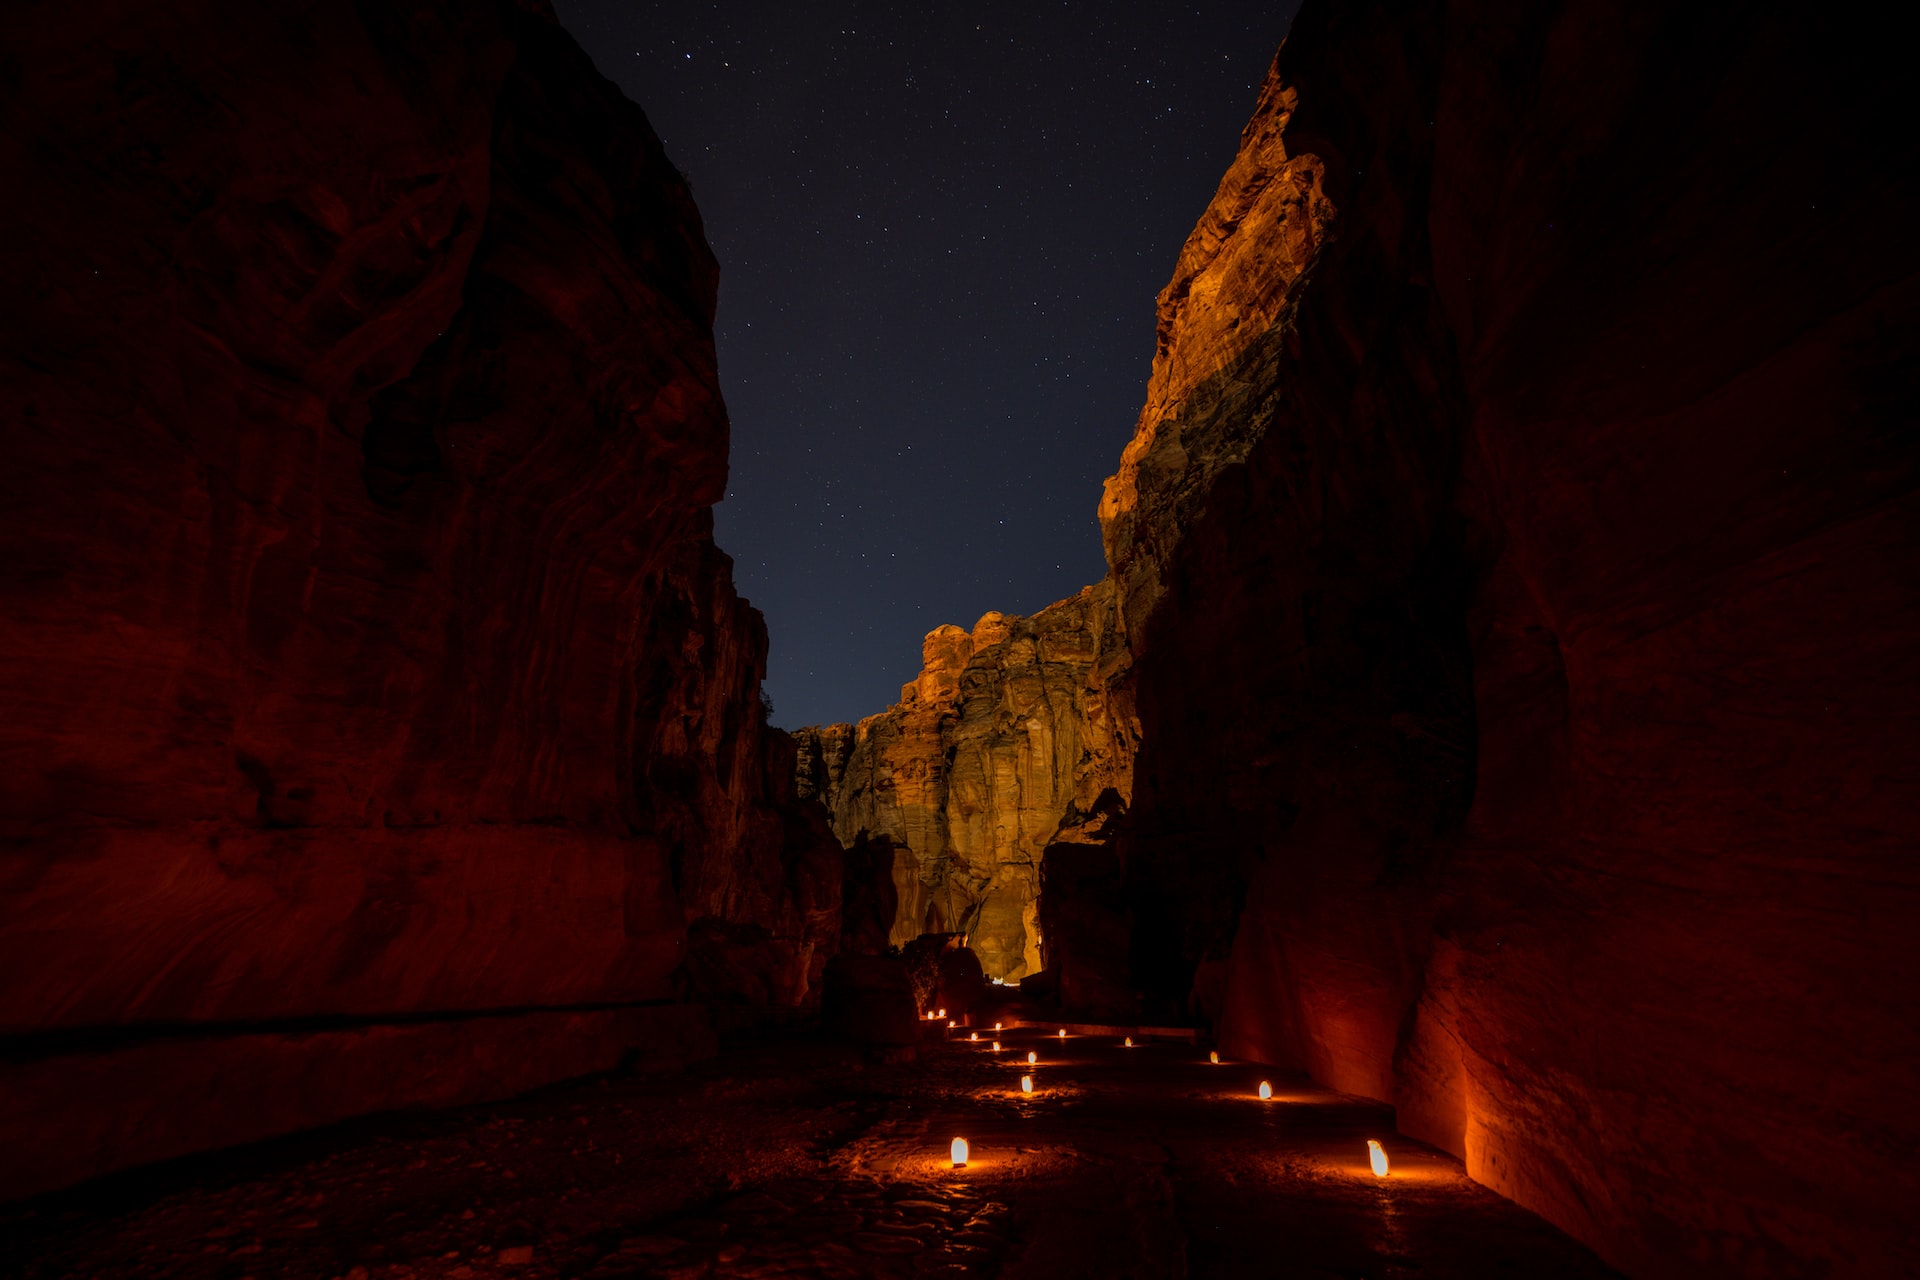 Petra by Night- The Siq gorge is glowing in the light of candles and stars